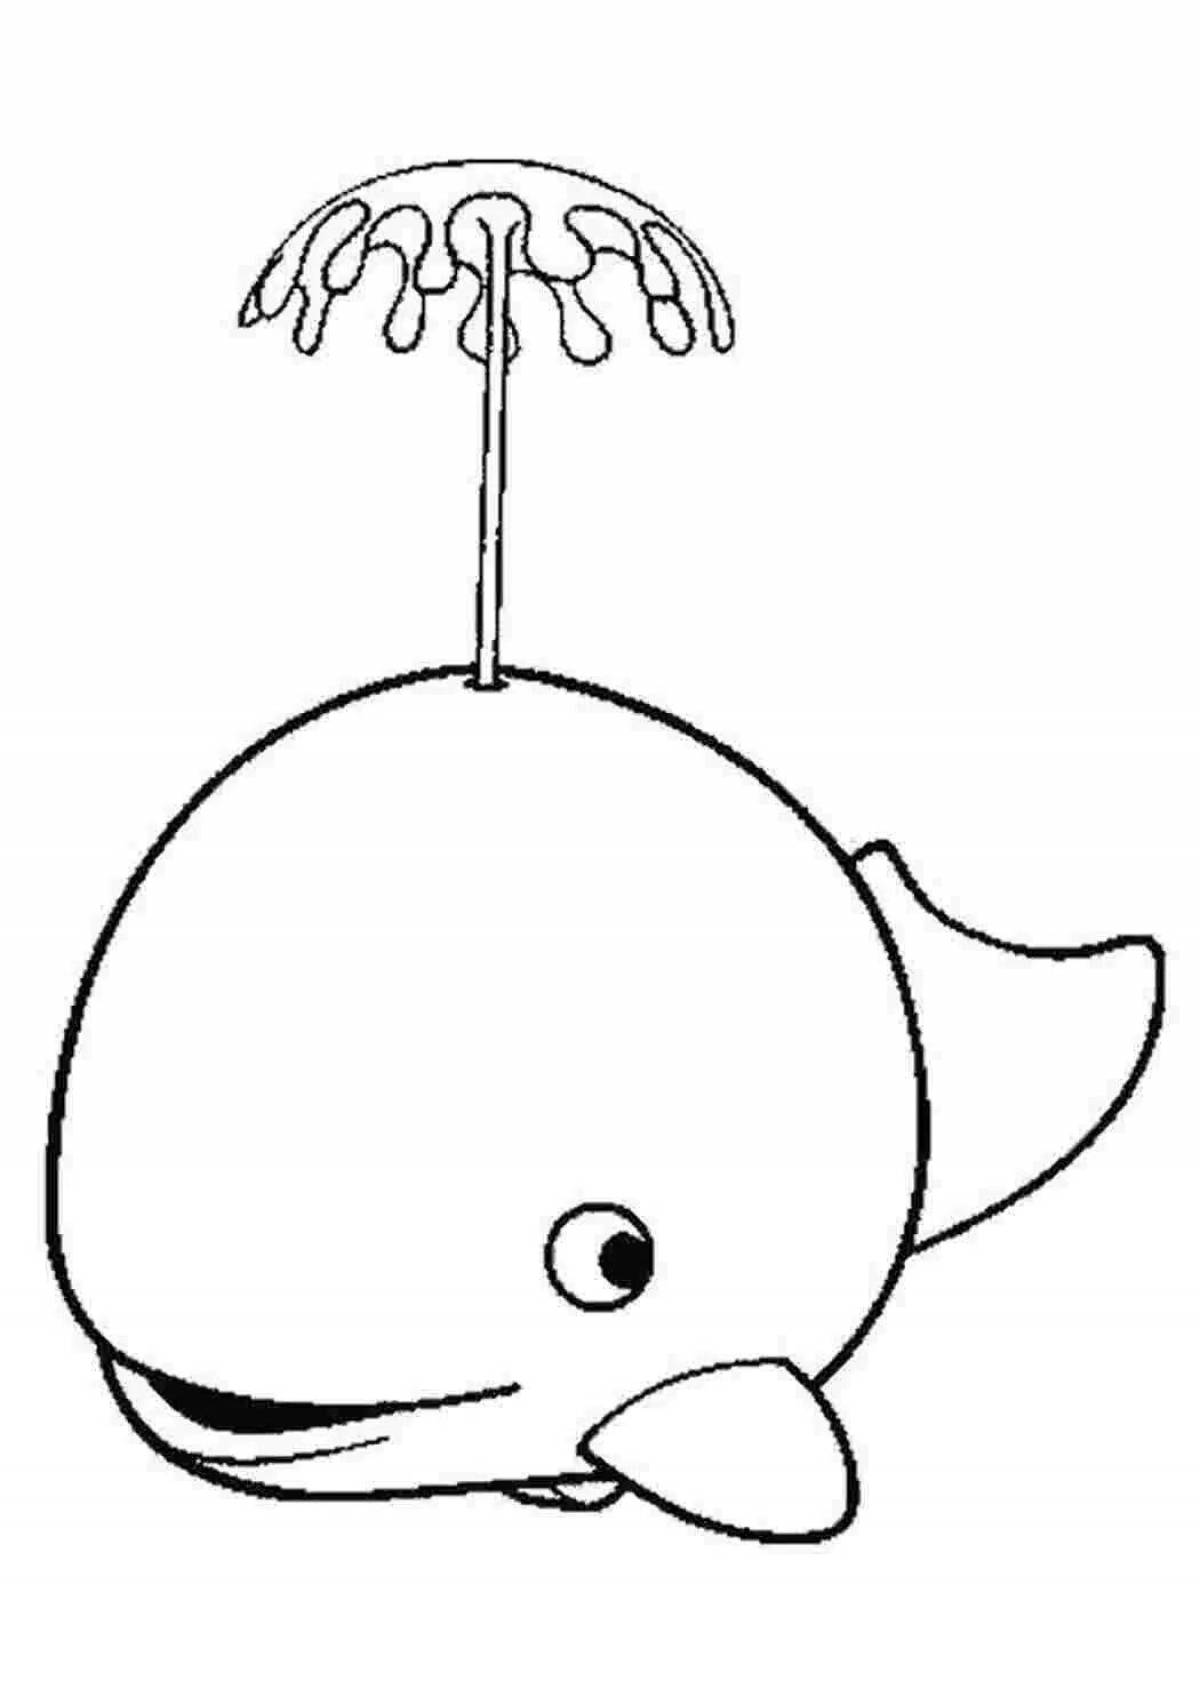 Playful whale coloring page for 3-4 year olds